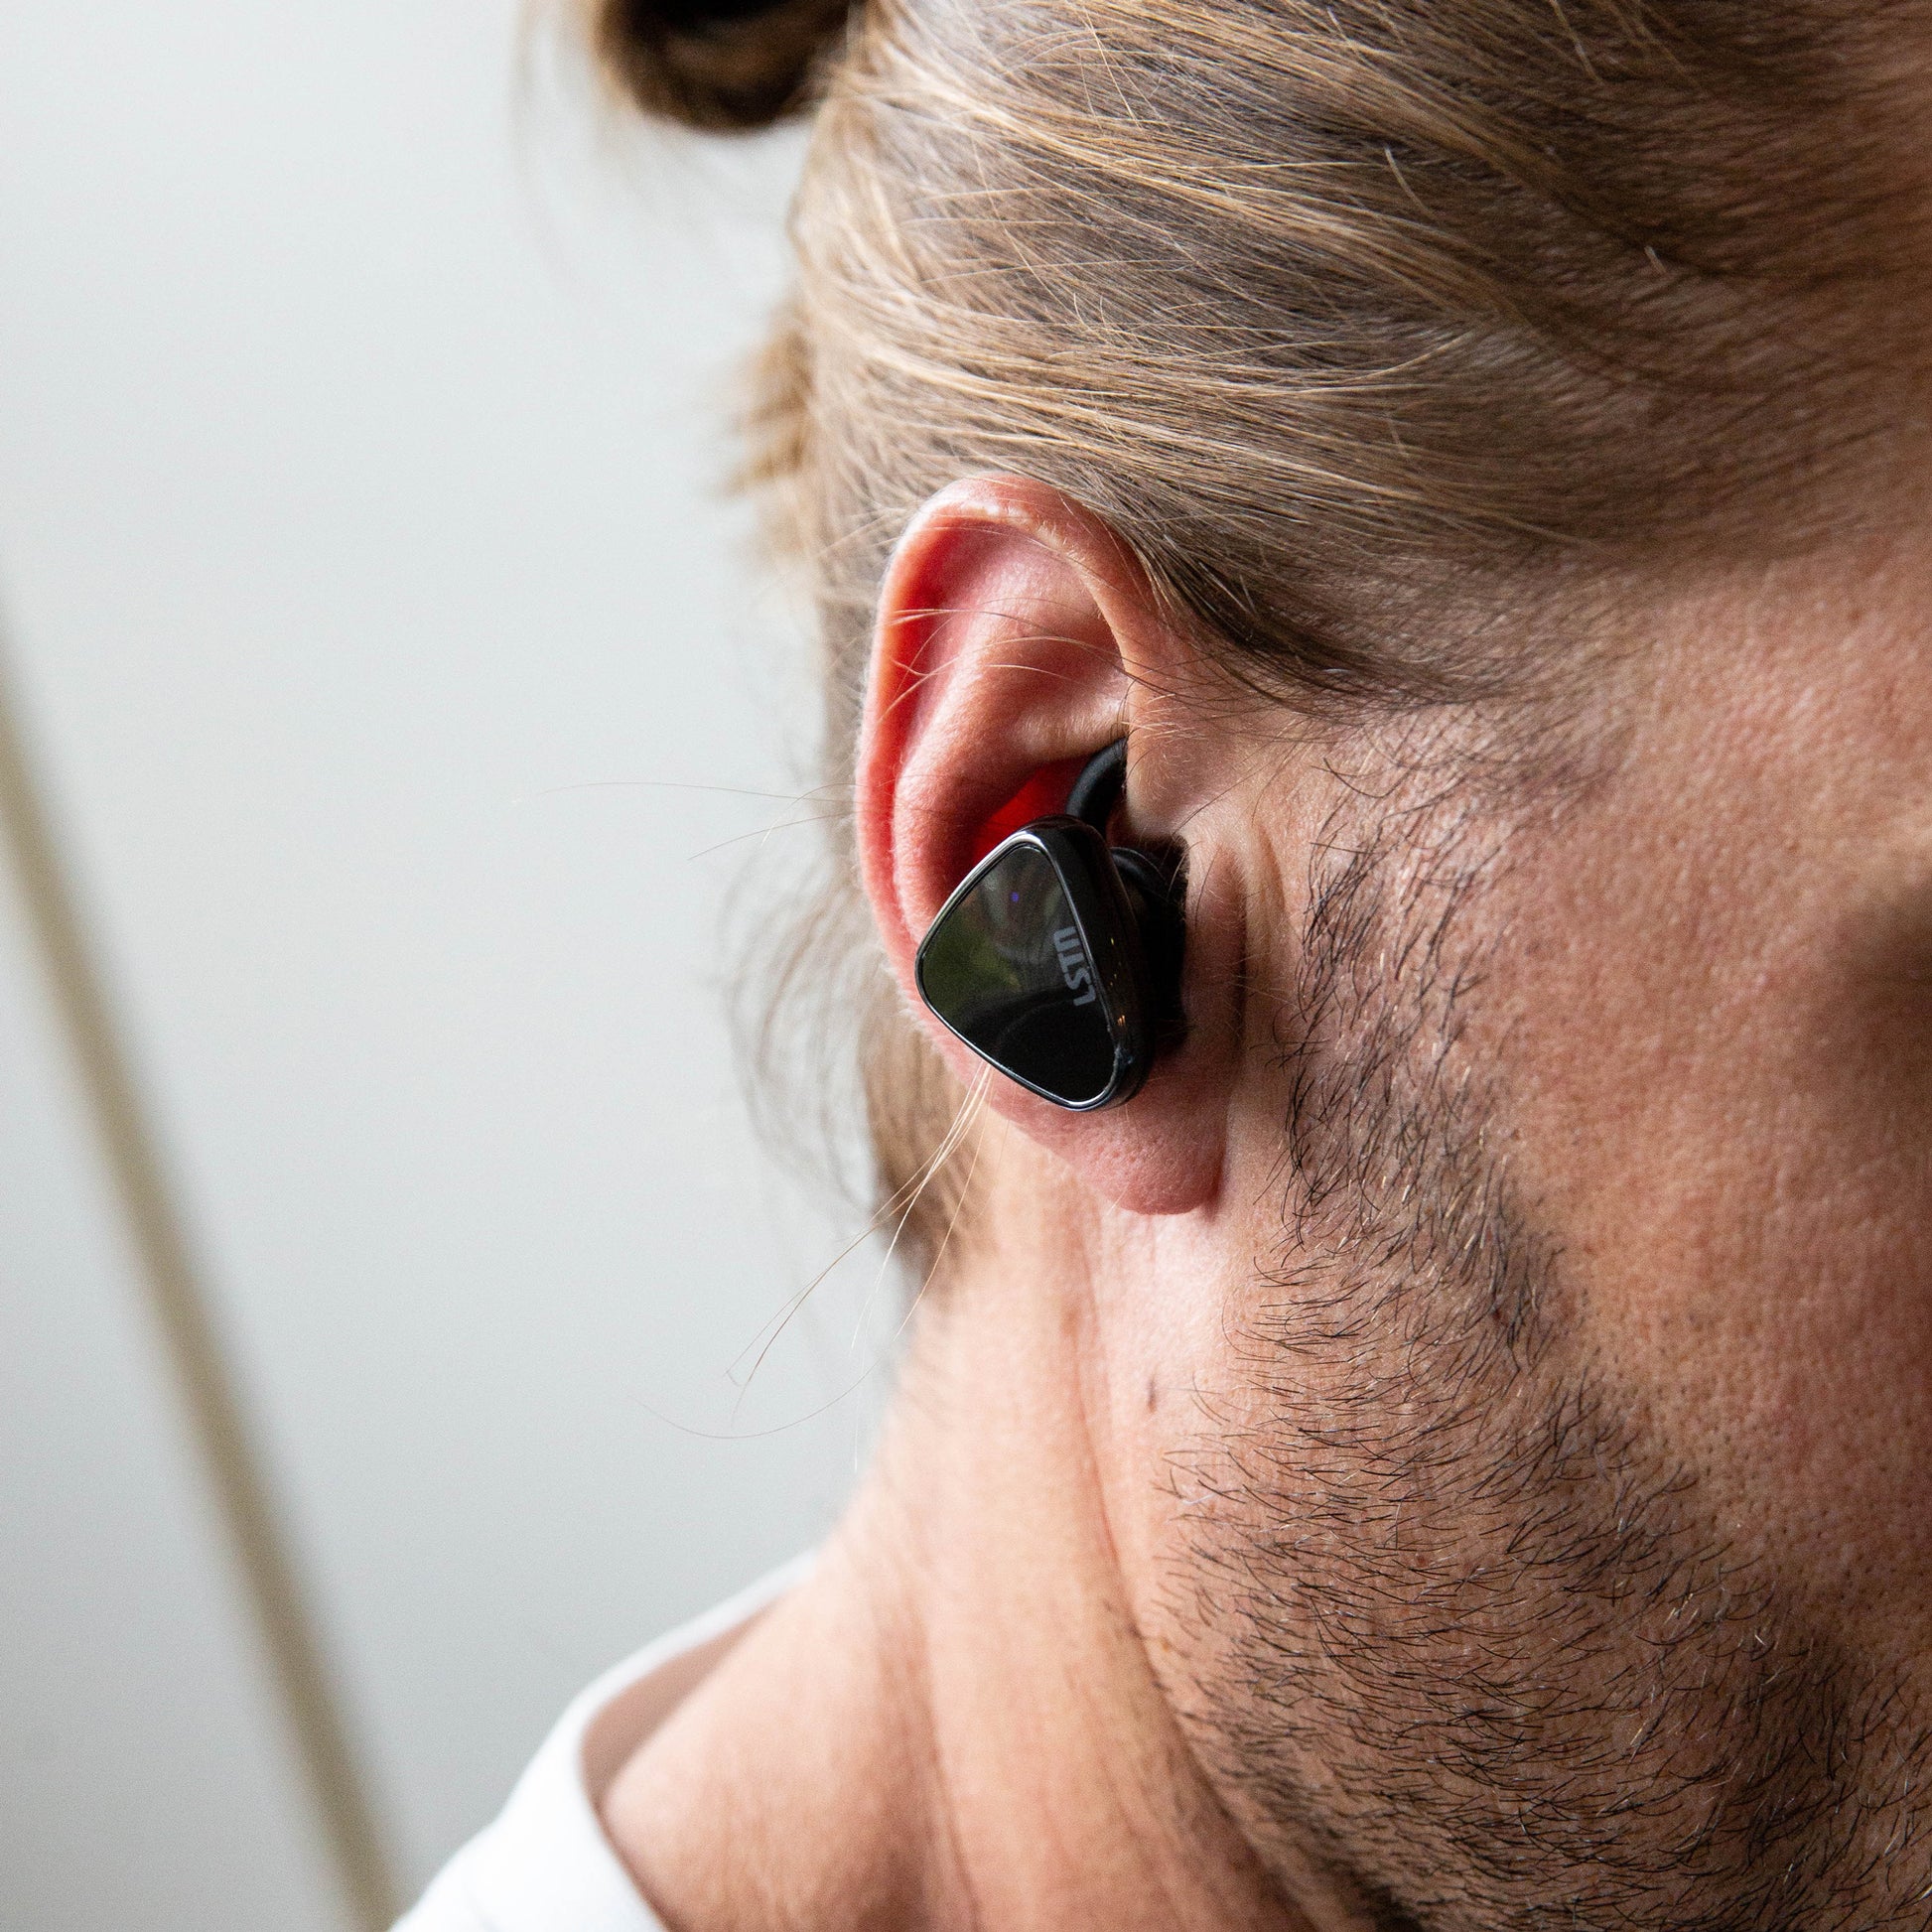 Ergonomically designed and weighing less than an ounce, the Beacon also comes with multiple ear tip and wing sizes, giving you 12 different combination options to help you find the perfect fit.